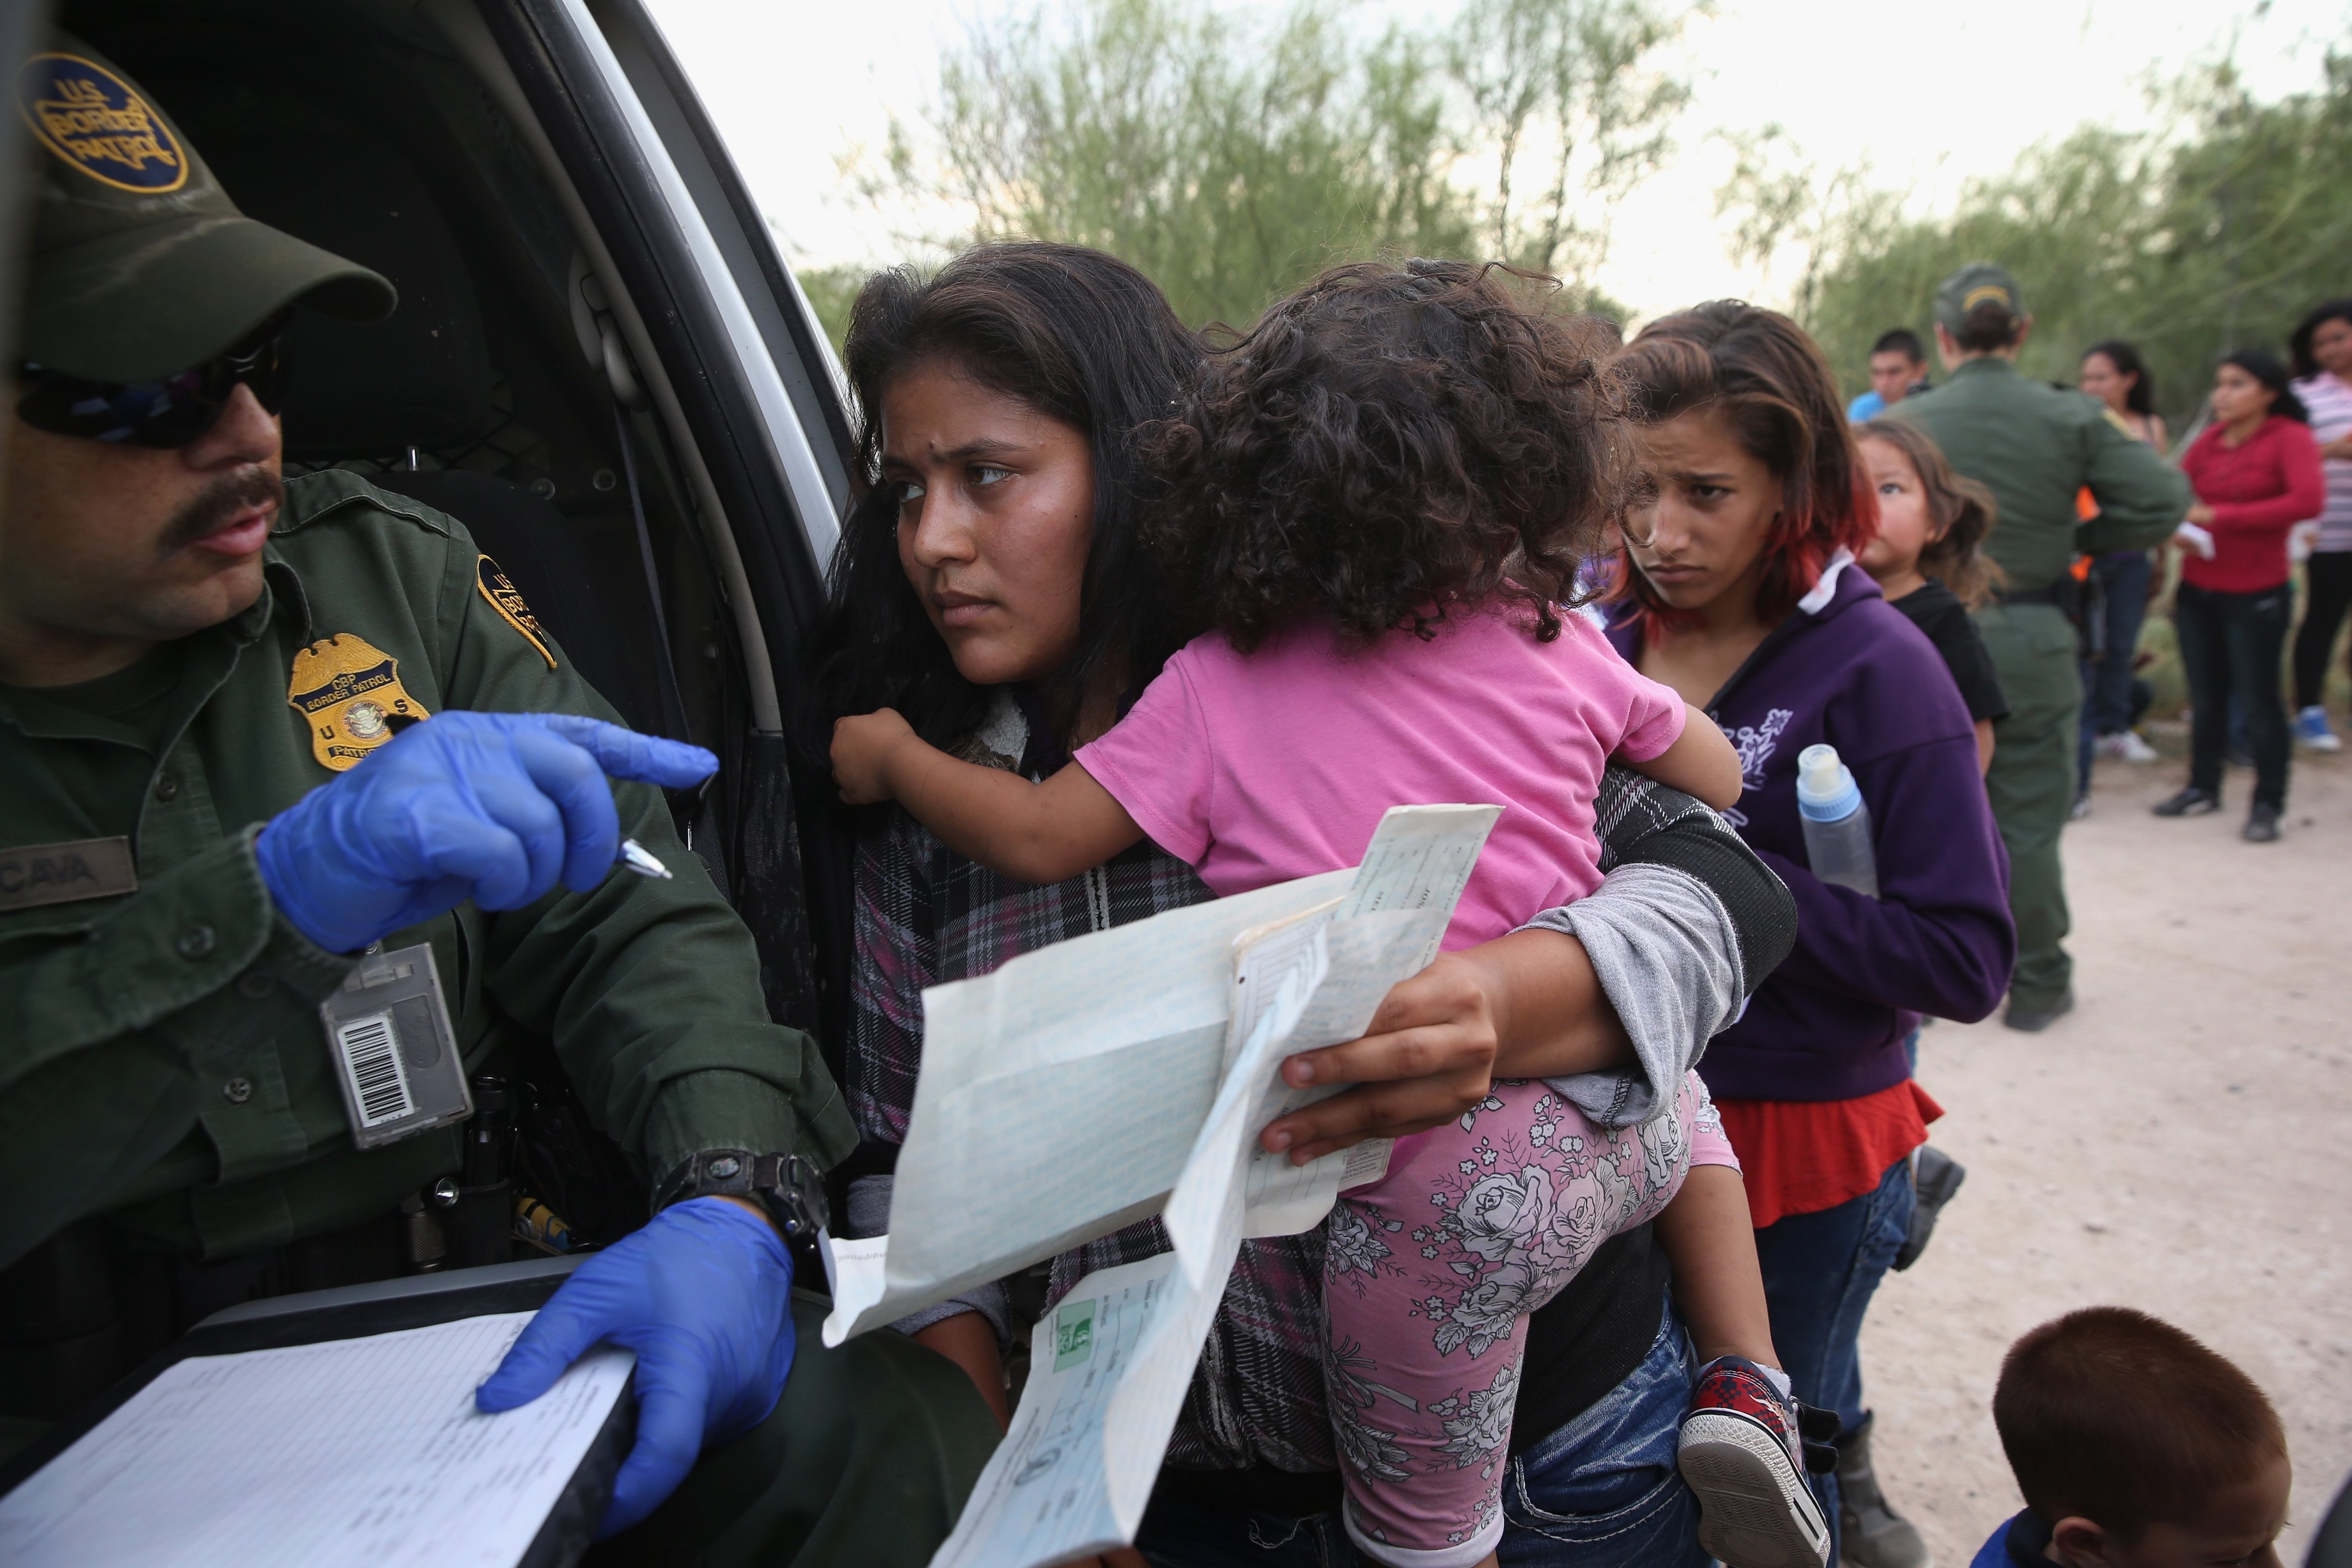 Immigrant Melida Patricio Castro from Honduras shows a birth certificate for her daughter Maria Celeste, 2, to a U.S. Border Patrol agent near the U.S.-Mexico border near Mission, Texas on July 24, 2014. (John Moore—Getty Images)